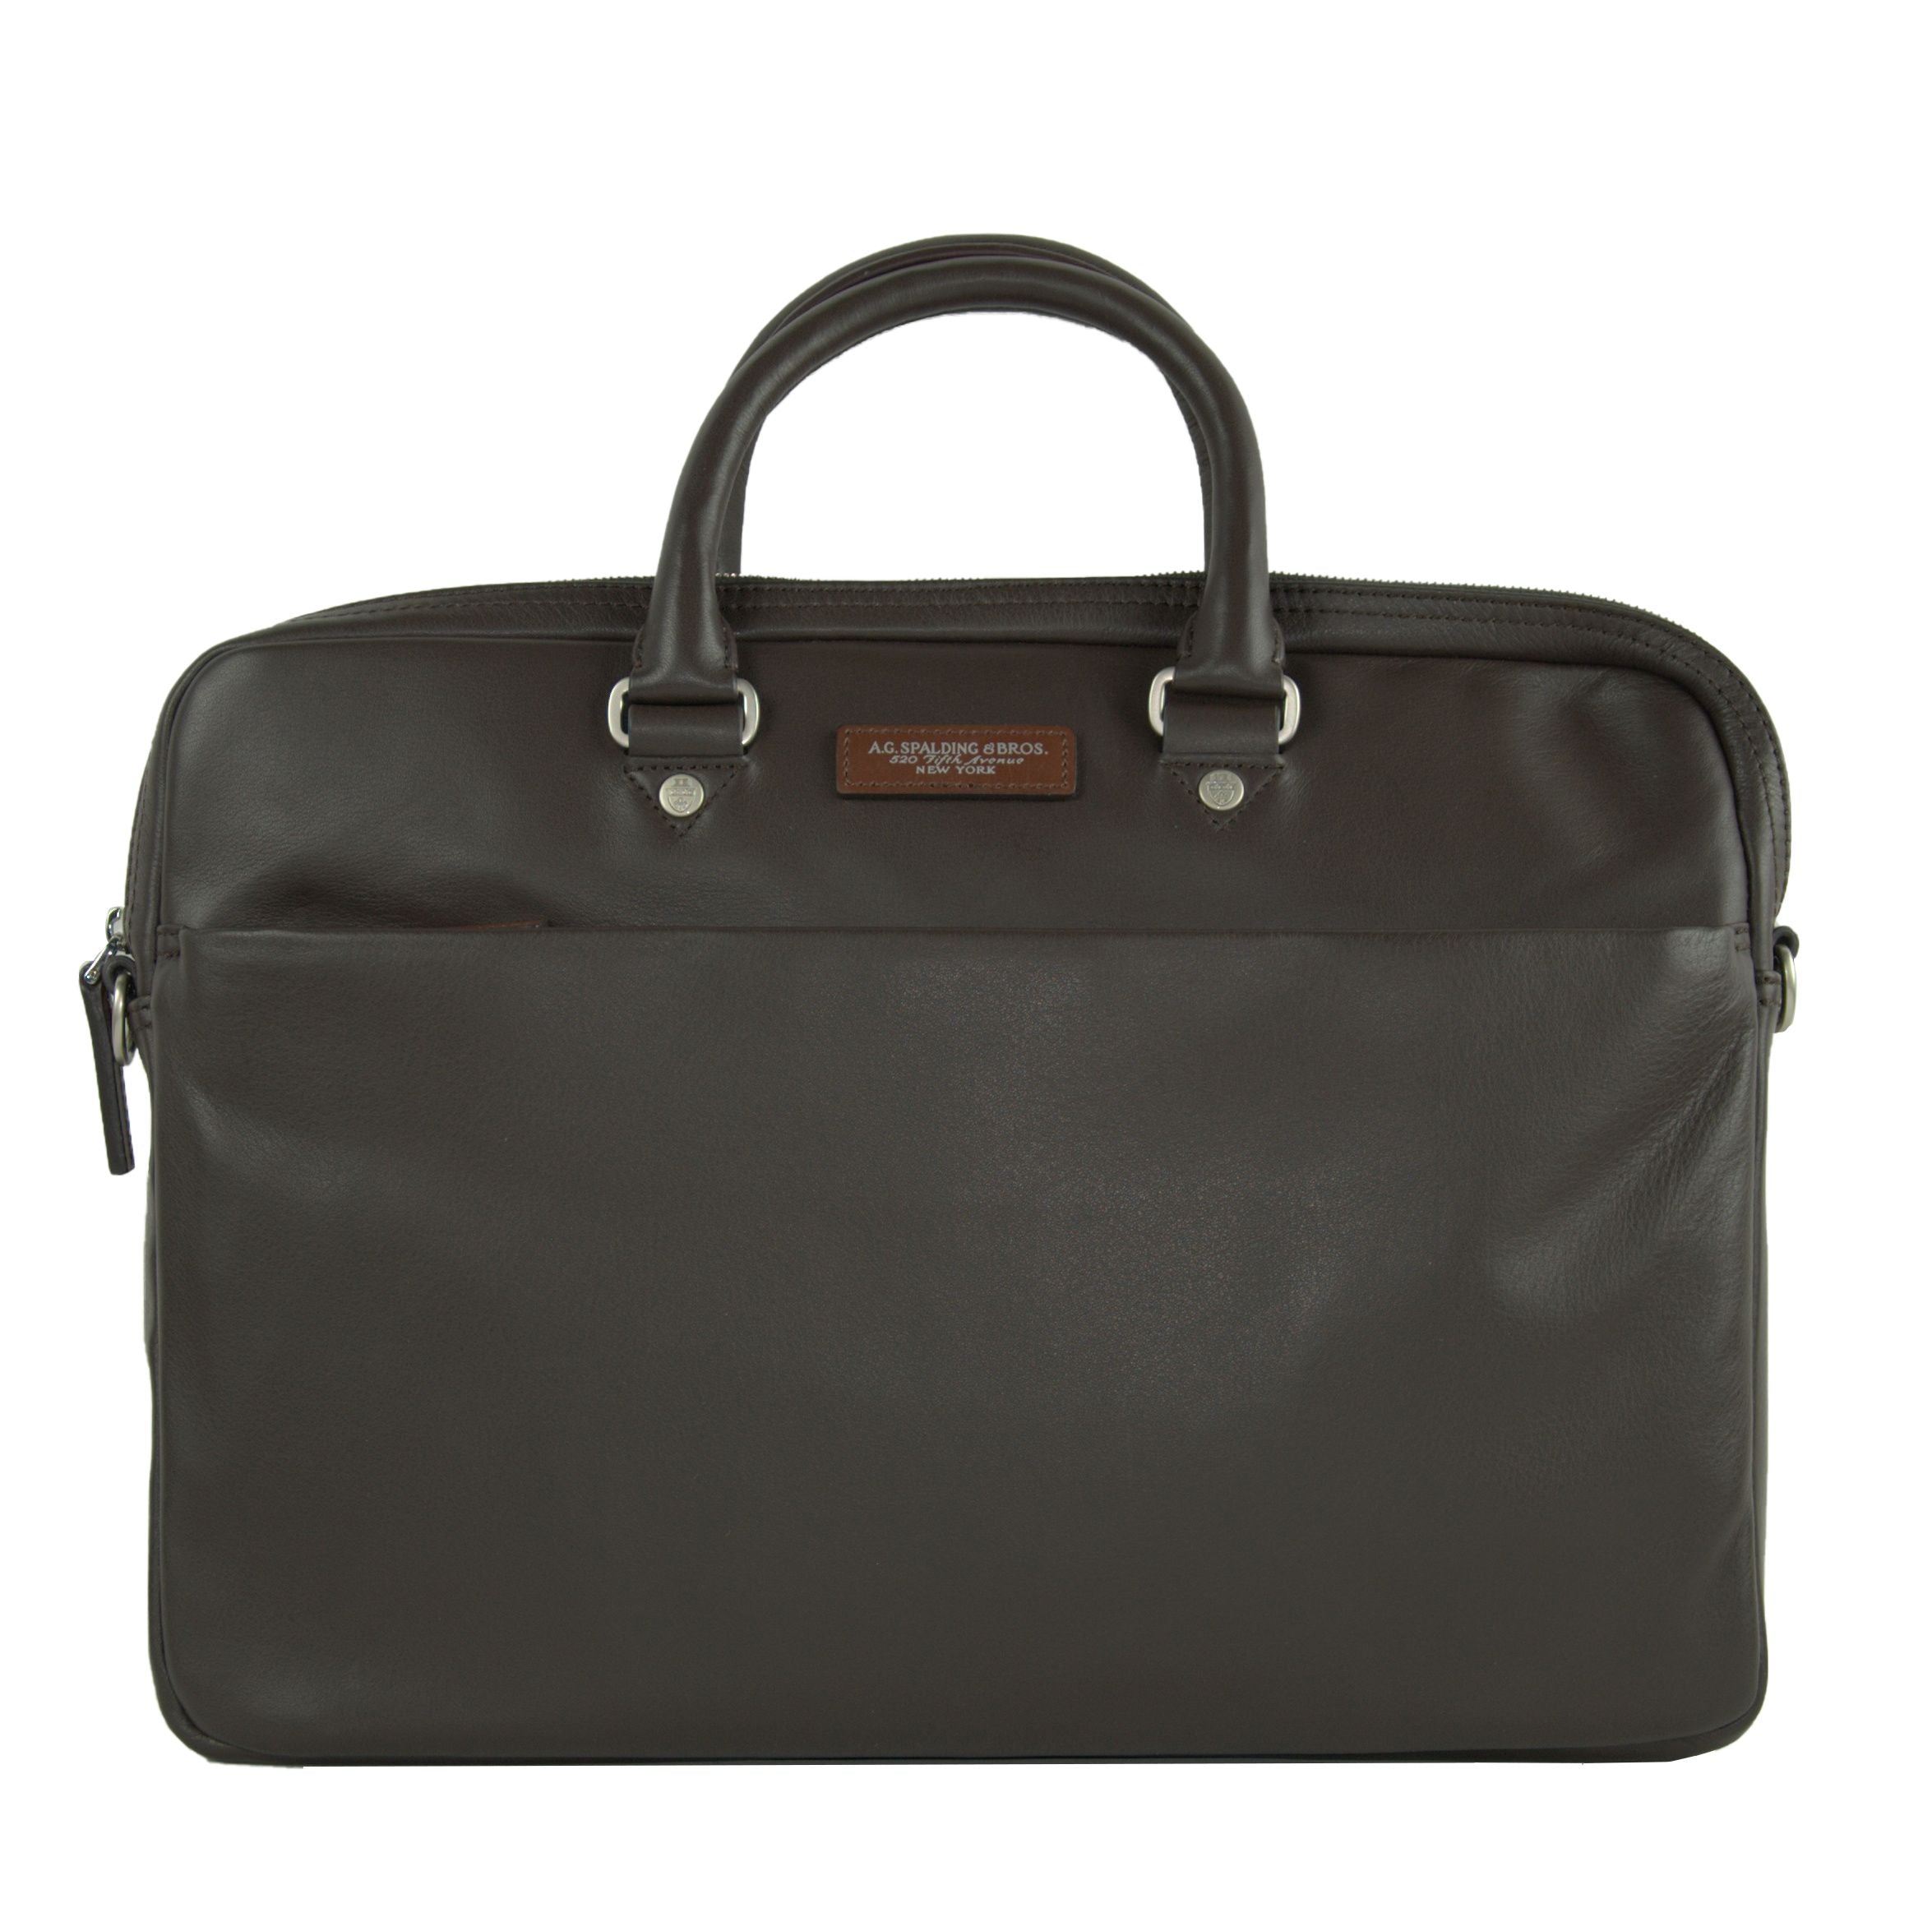 A.G. Spalding & Bros Brown Leather Bovina Briefcase